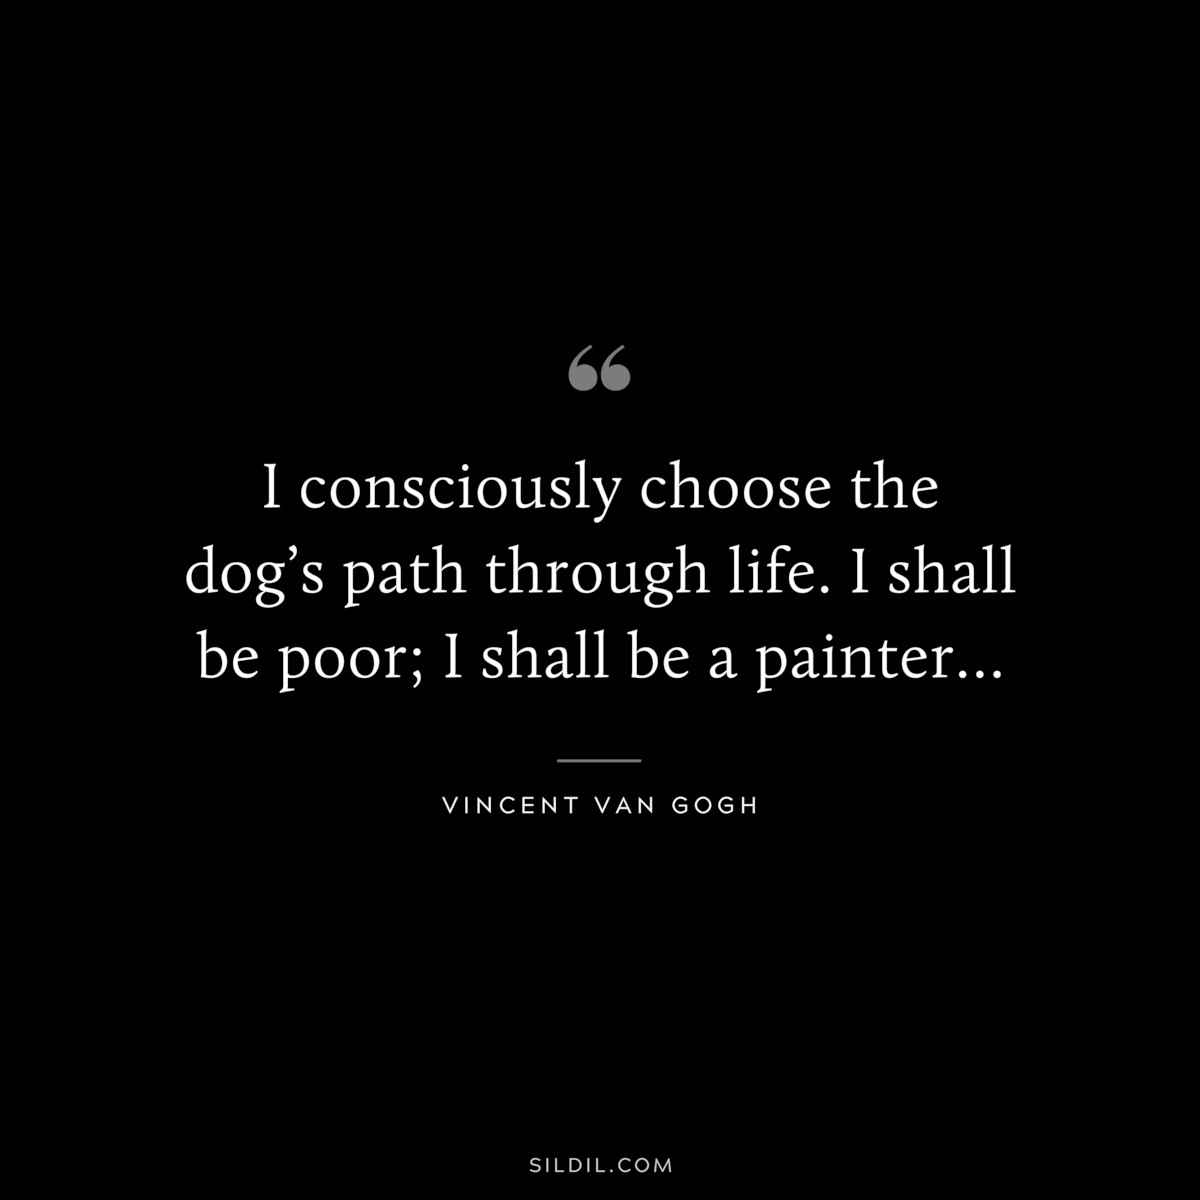 I consciously choose the dog’s path through life. I shall be poor; I shall be a painter… ― Vincent van Gogh